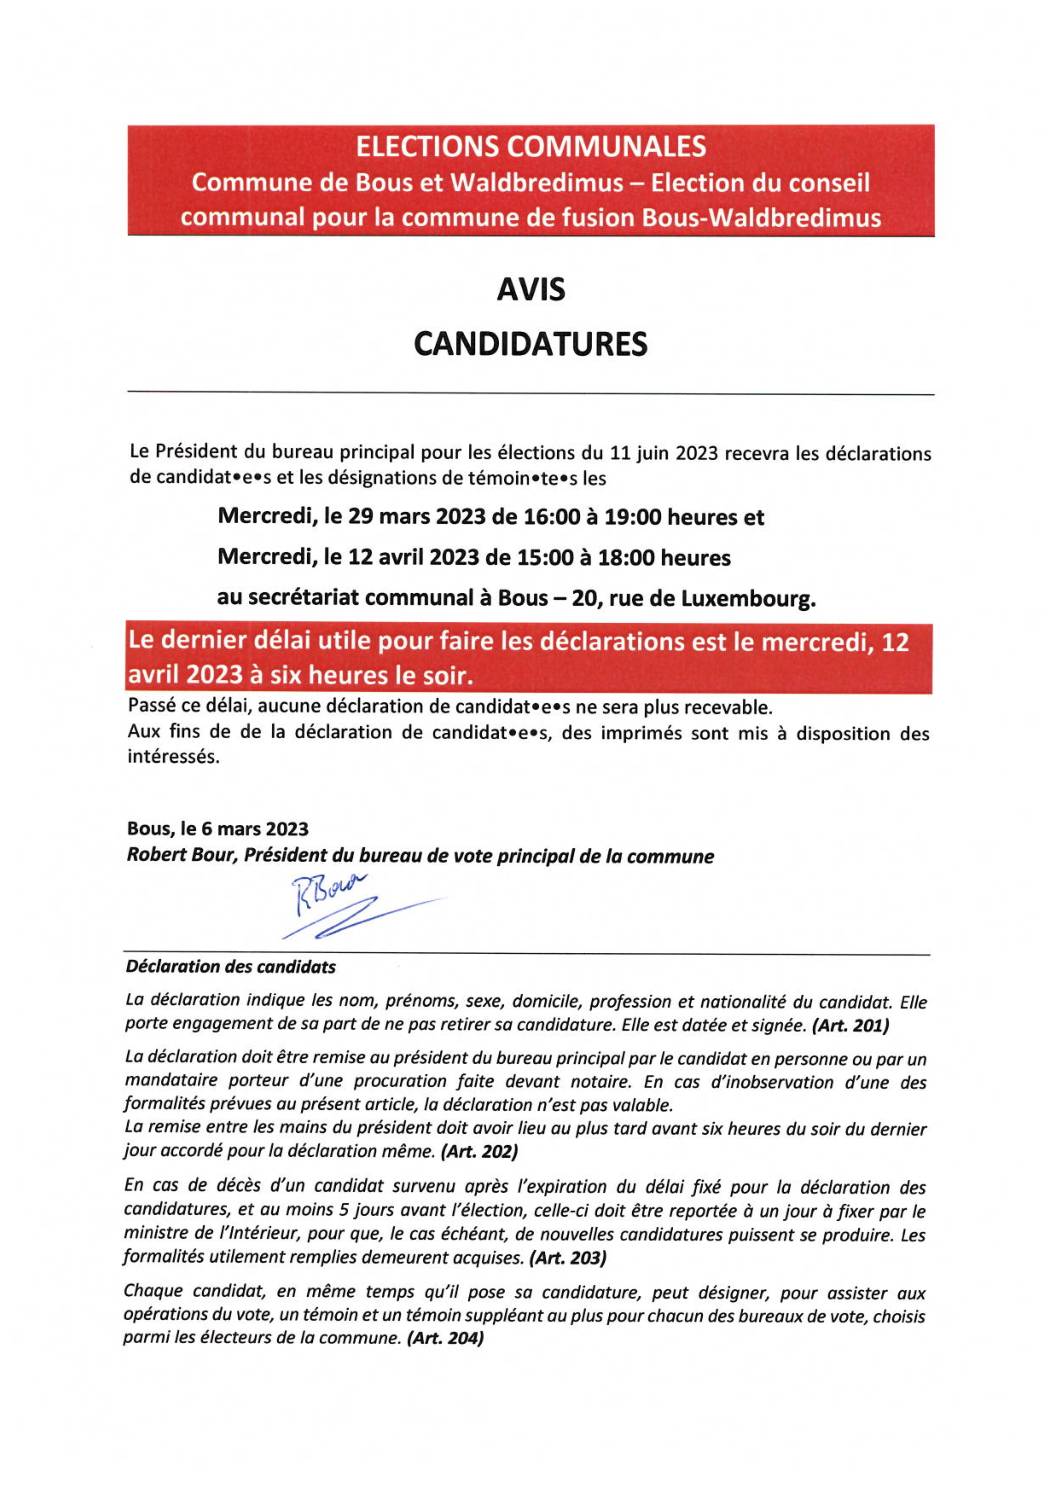 Elections communales - Candidatures